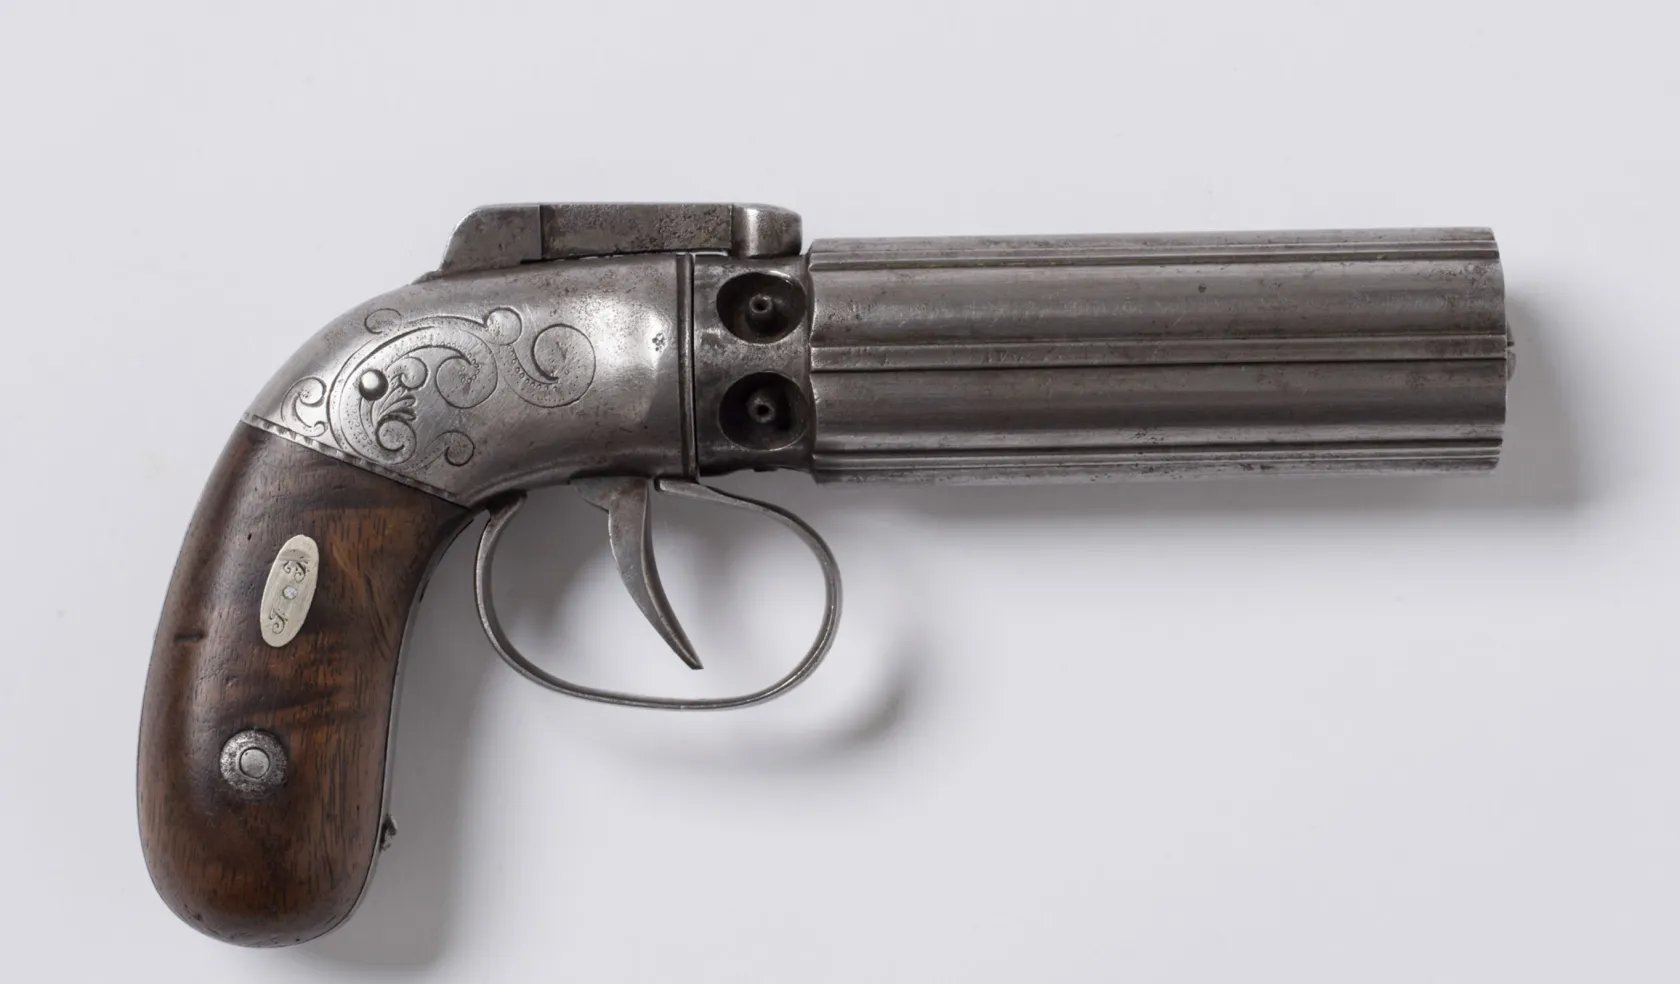 Image of an engraved silver pepperbox pistol with a wooden handle that was used by Joseph Smith when being attacked in Carthage Jail, Illinois,on a white background.